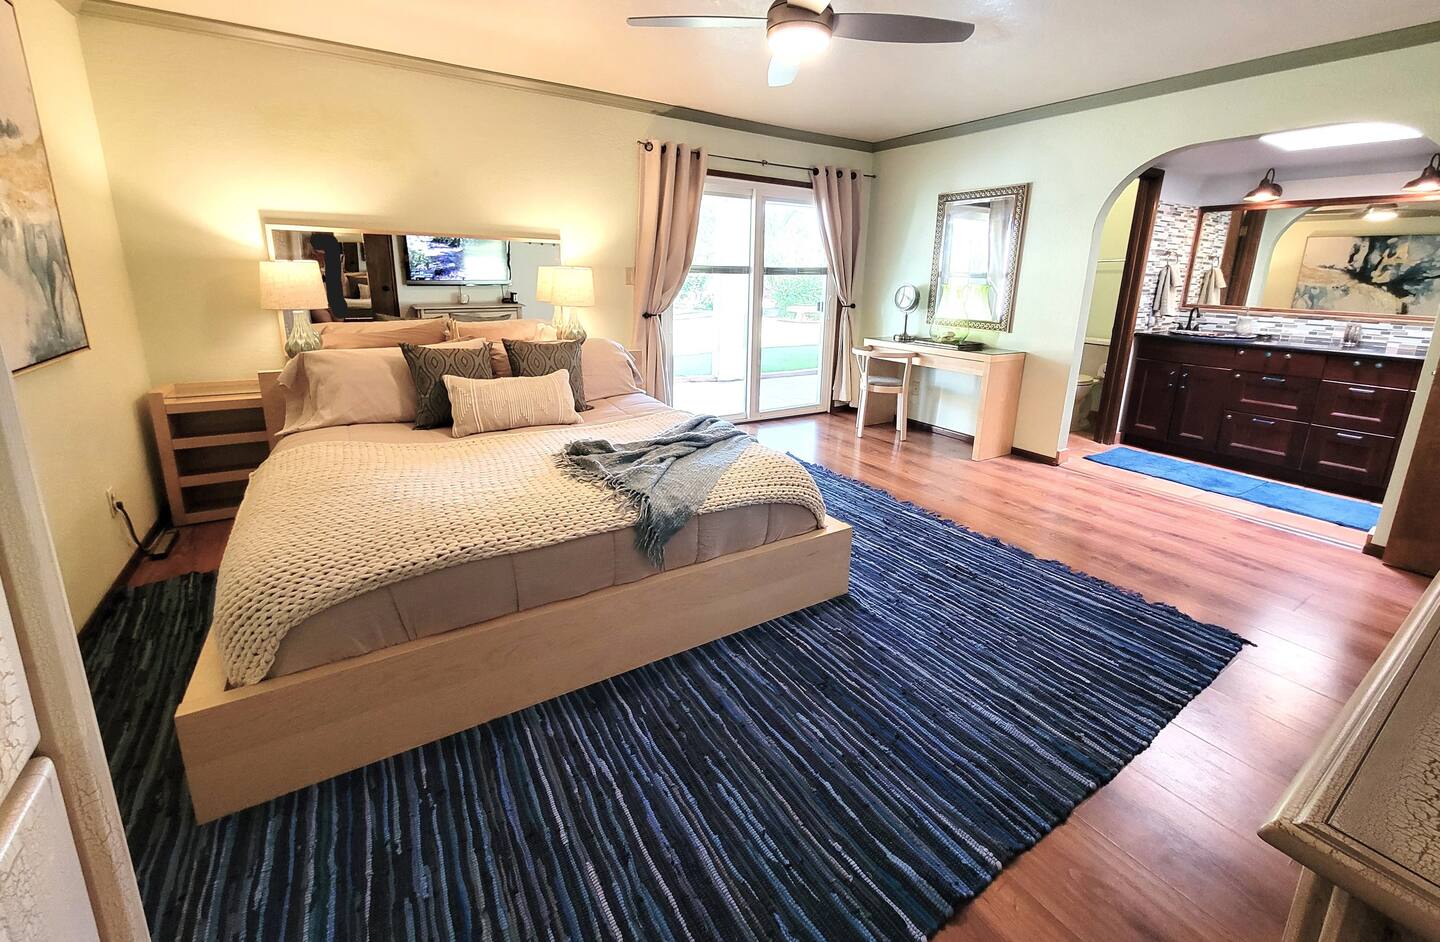 The master bedroom is furnished with a king-sized bed.